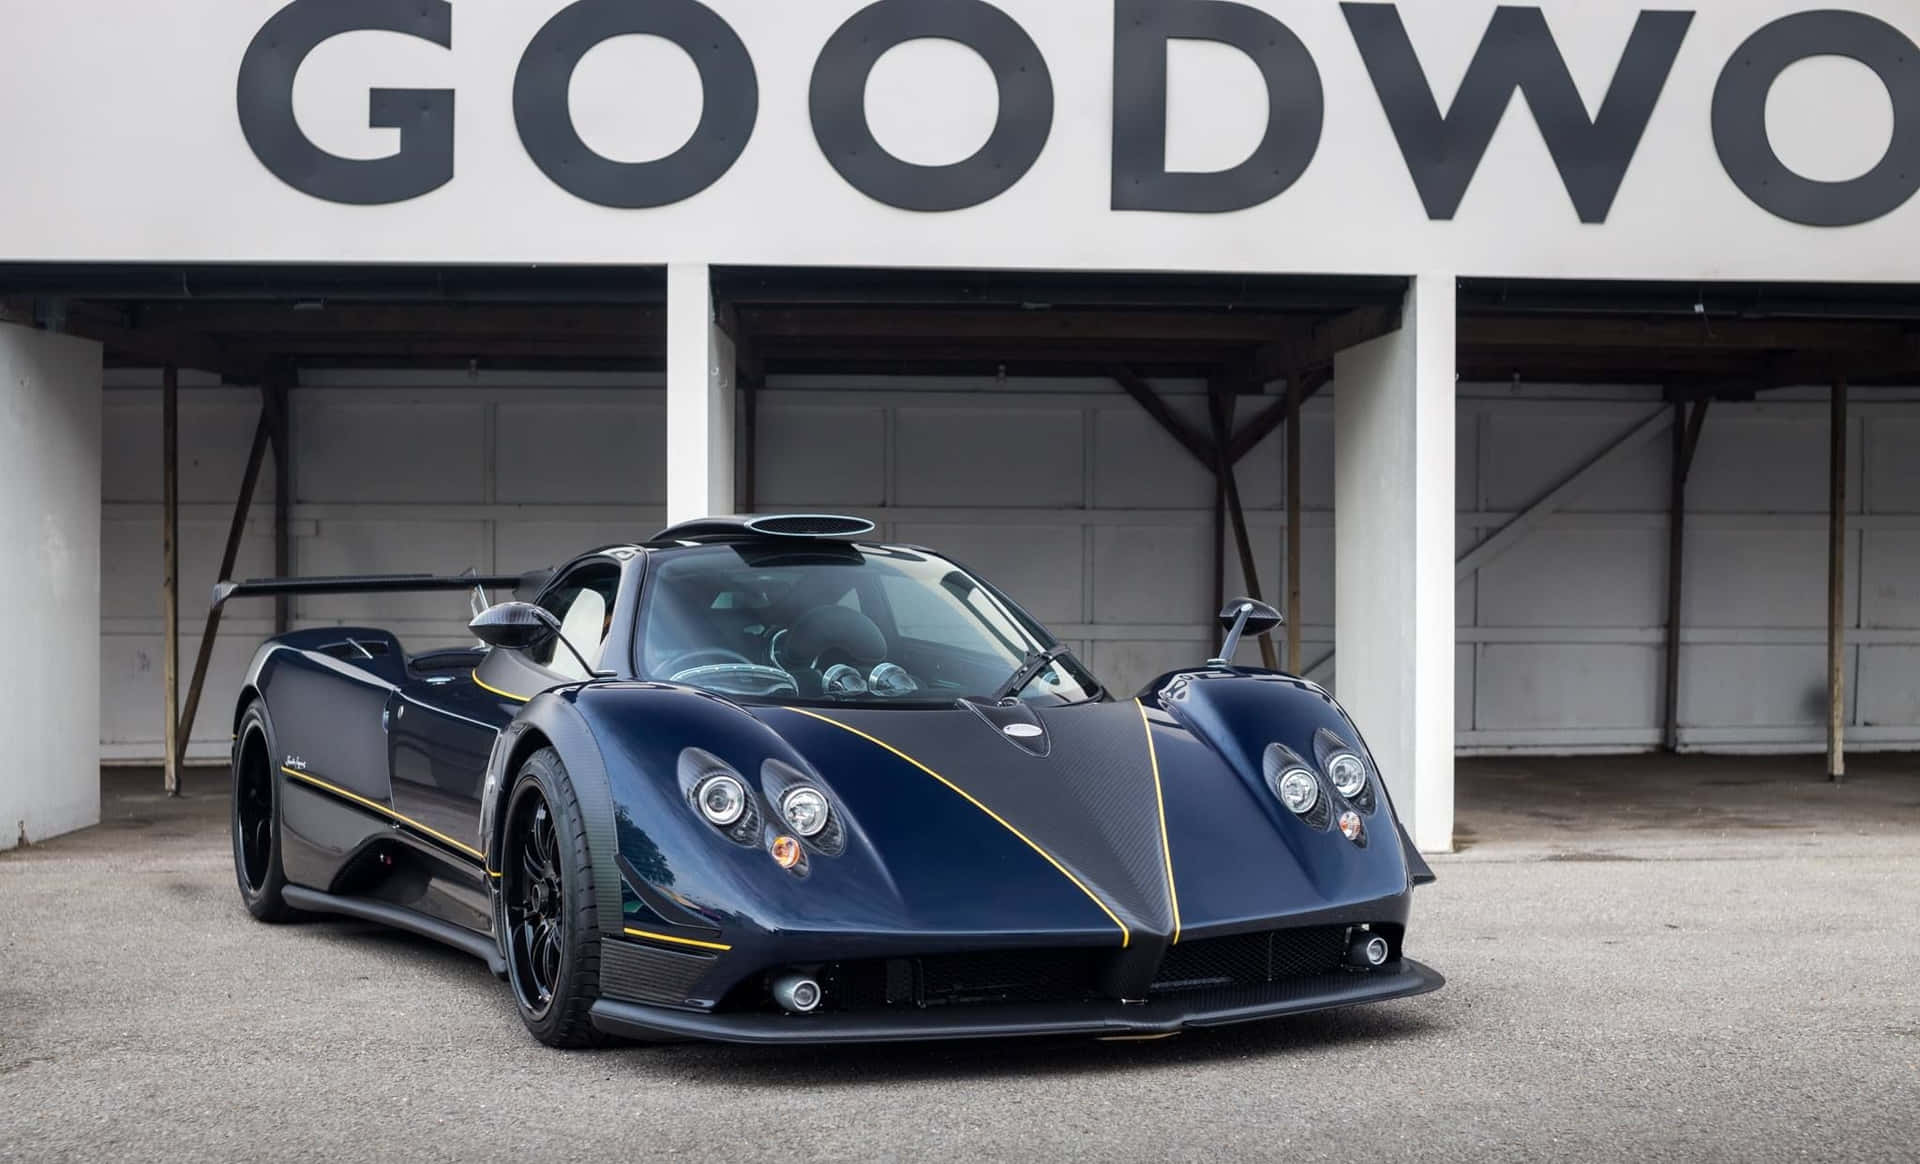 The stunning Pagani Zonda C12 Roadster showcasing its contemporary design and powerful presence. Wallpaper